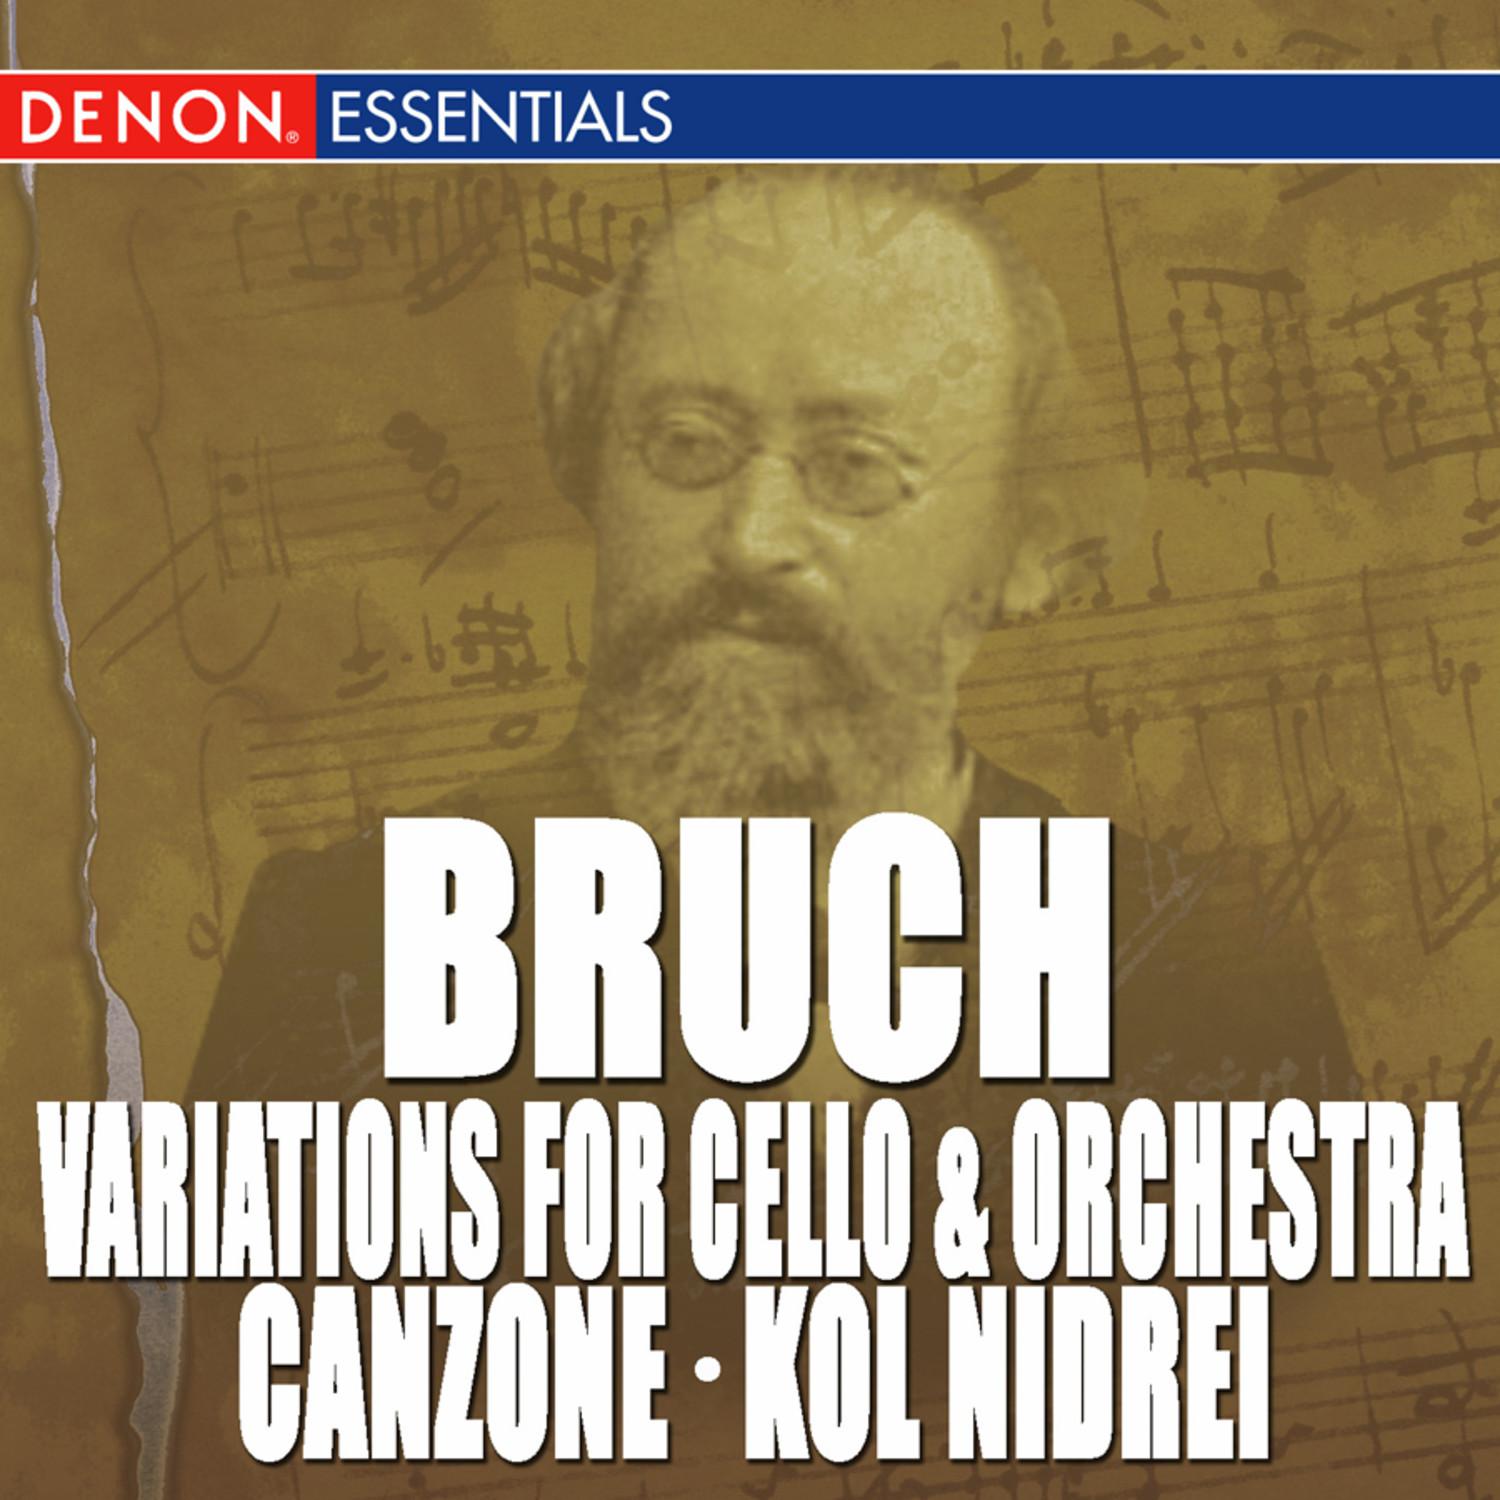 Bruch: Variations for Cello & Orchestra, Op. 47 - Canzone for Cello & Orchestra, Op. 55 - Kol Nidrei